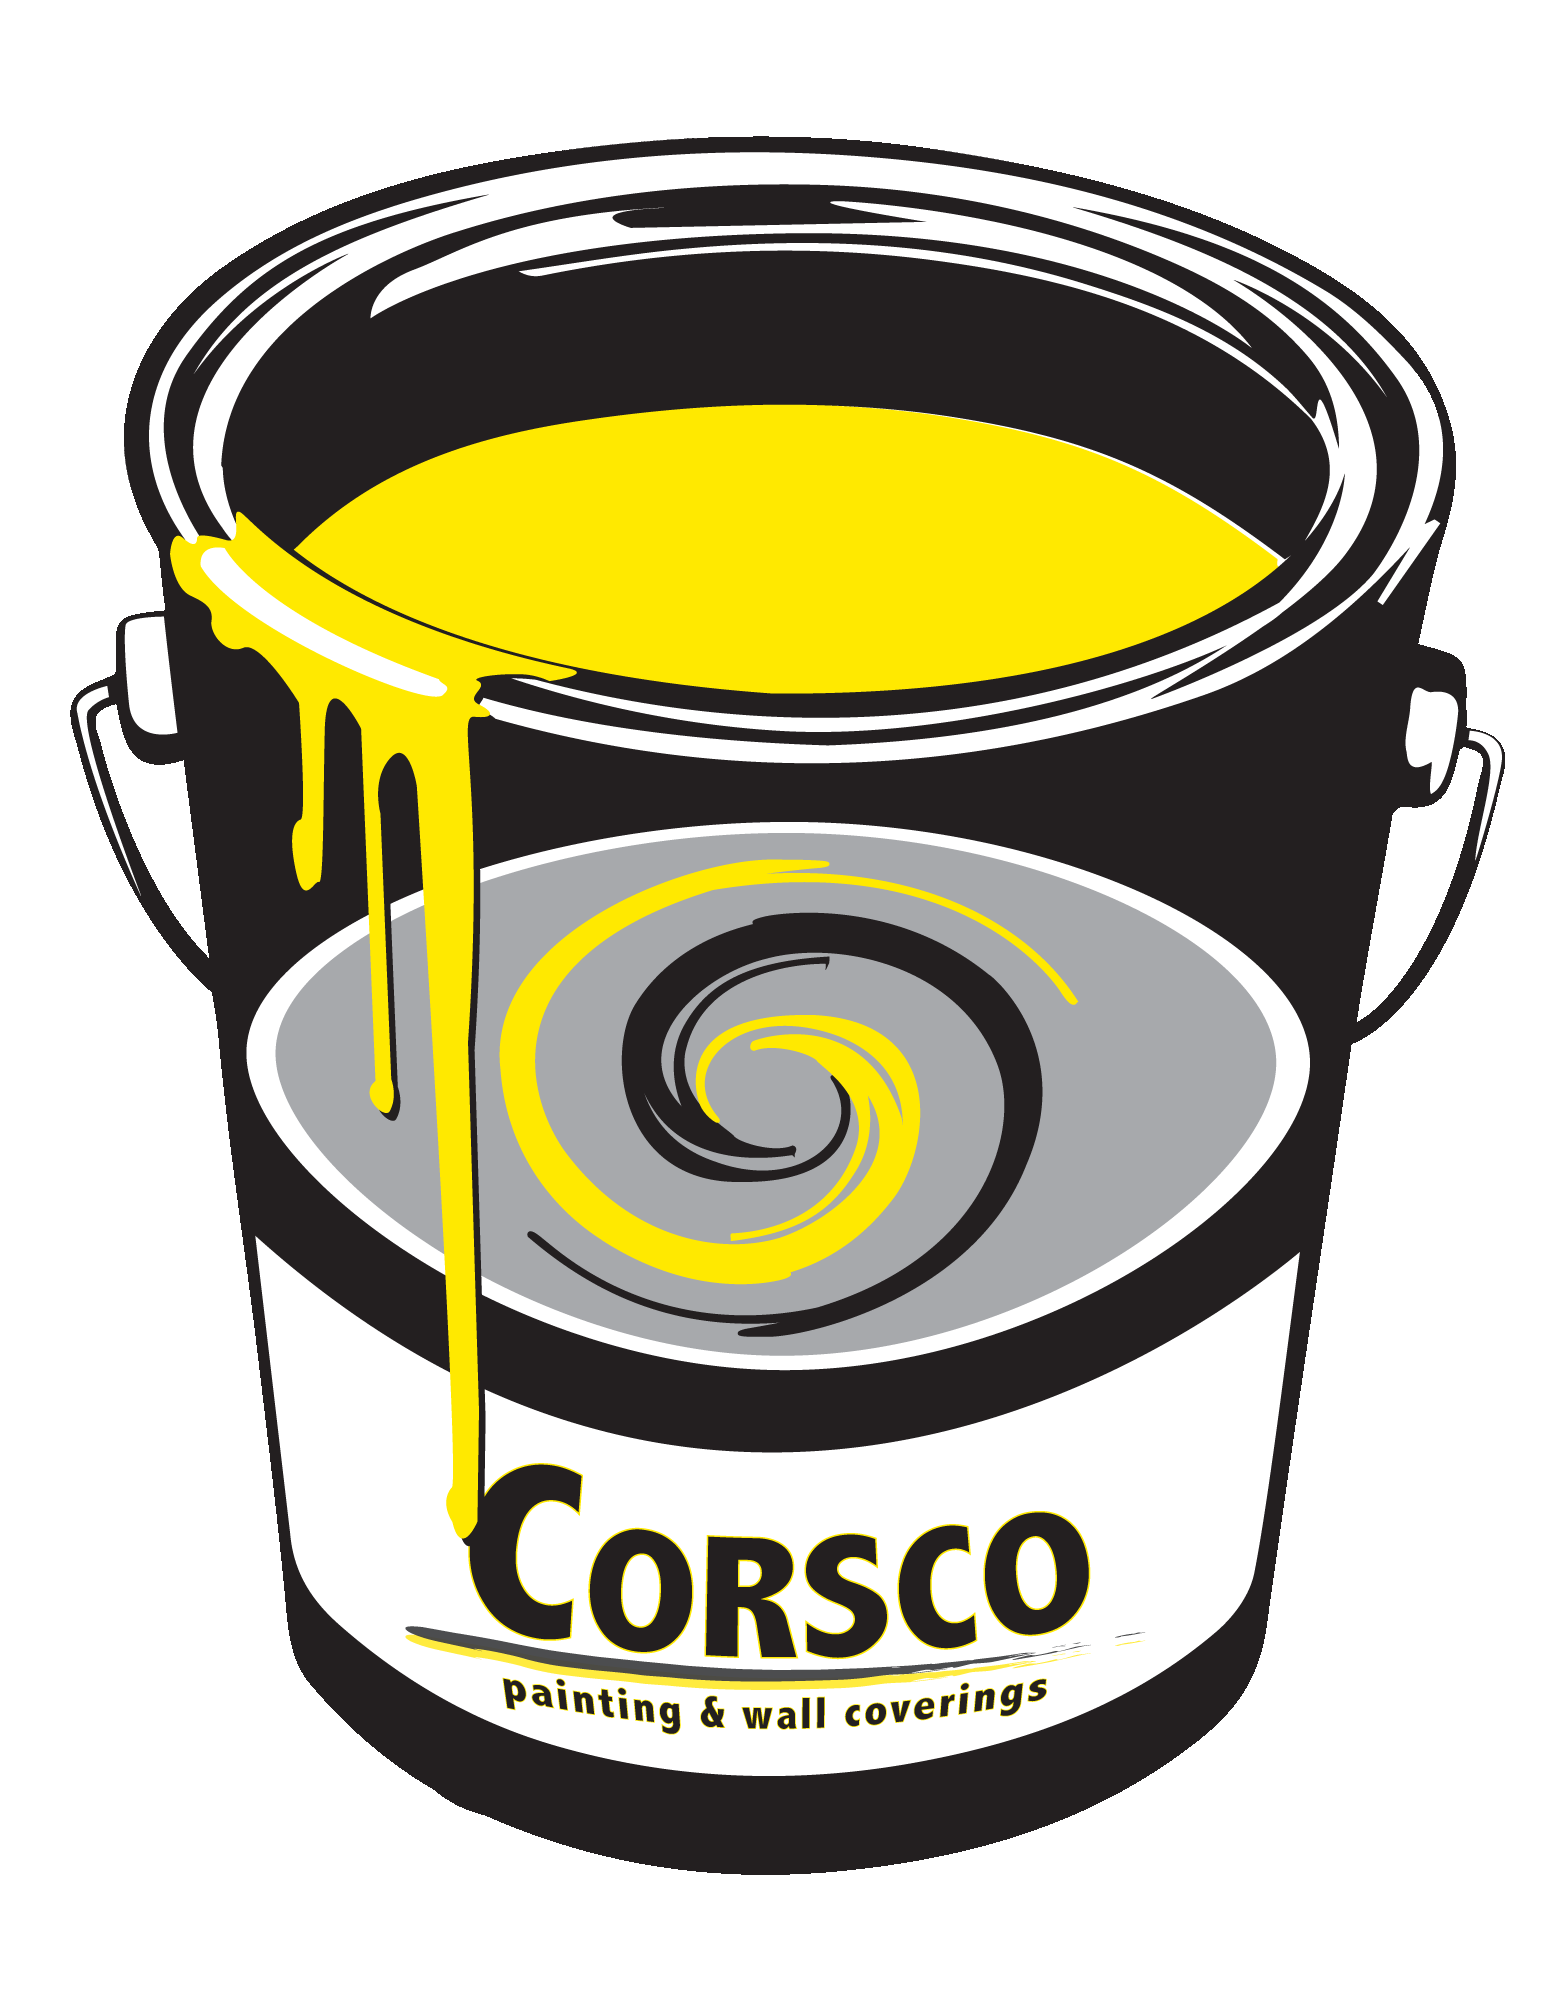 Corsco Painting logo paint can with a dip.